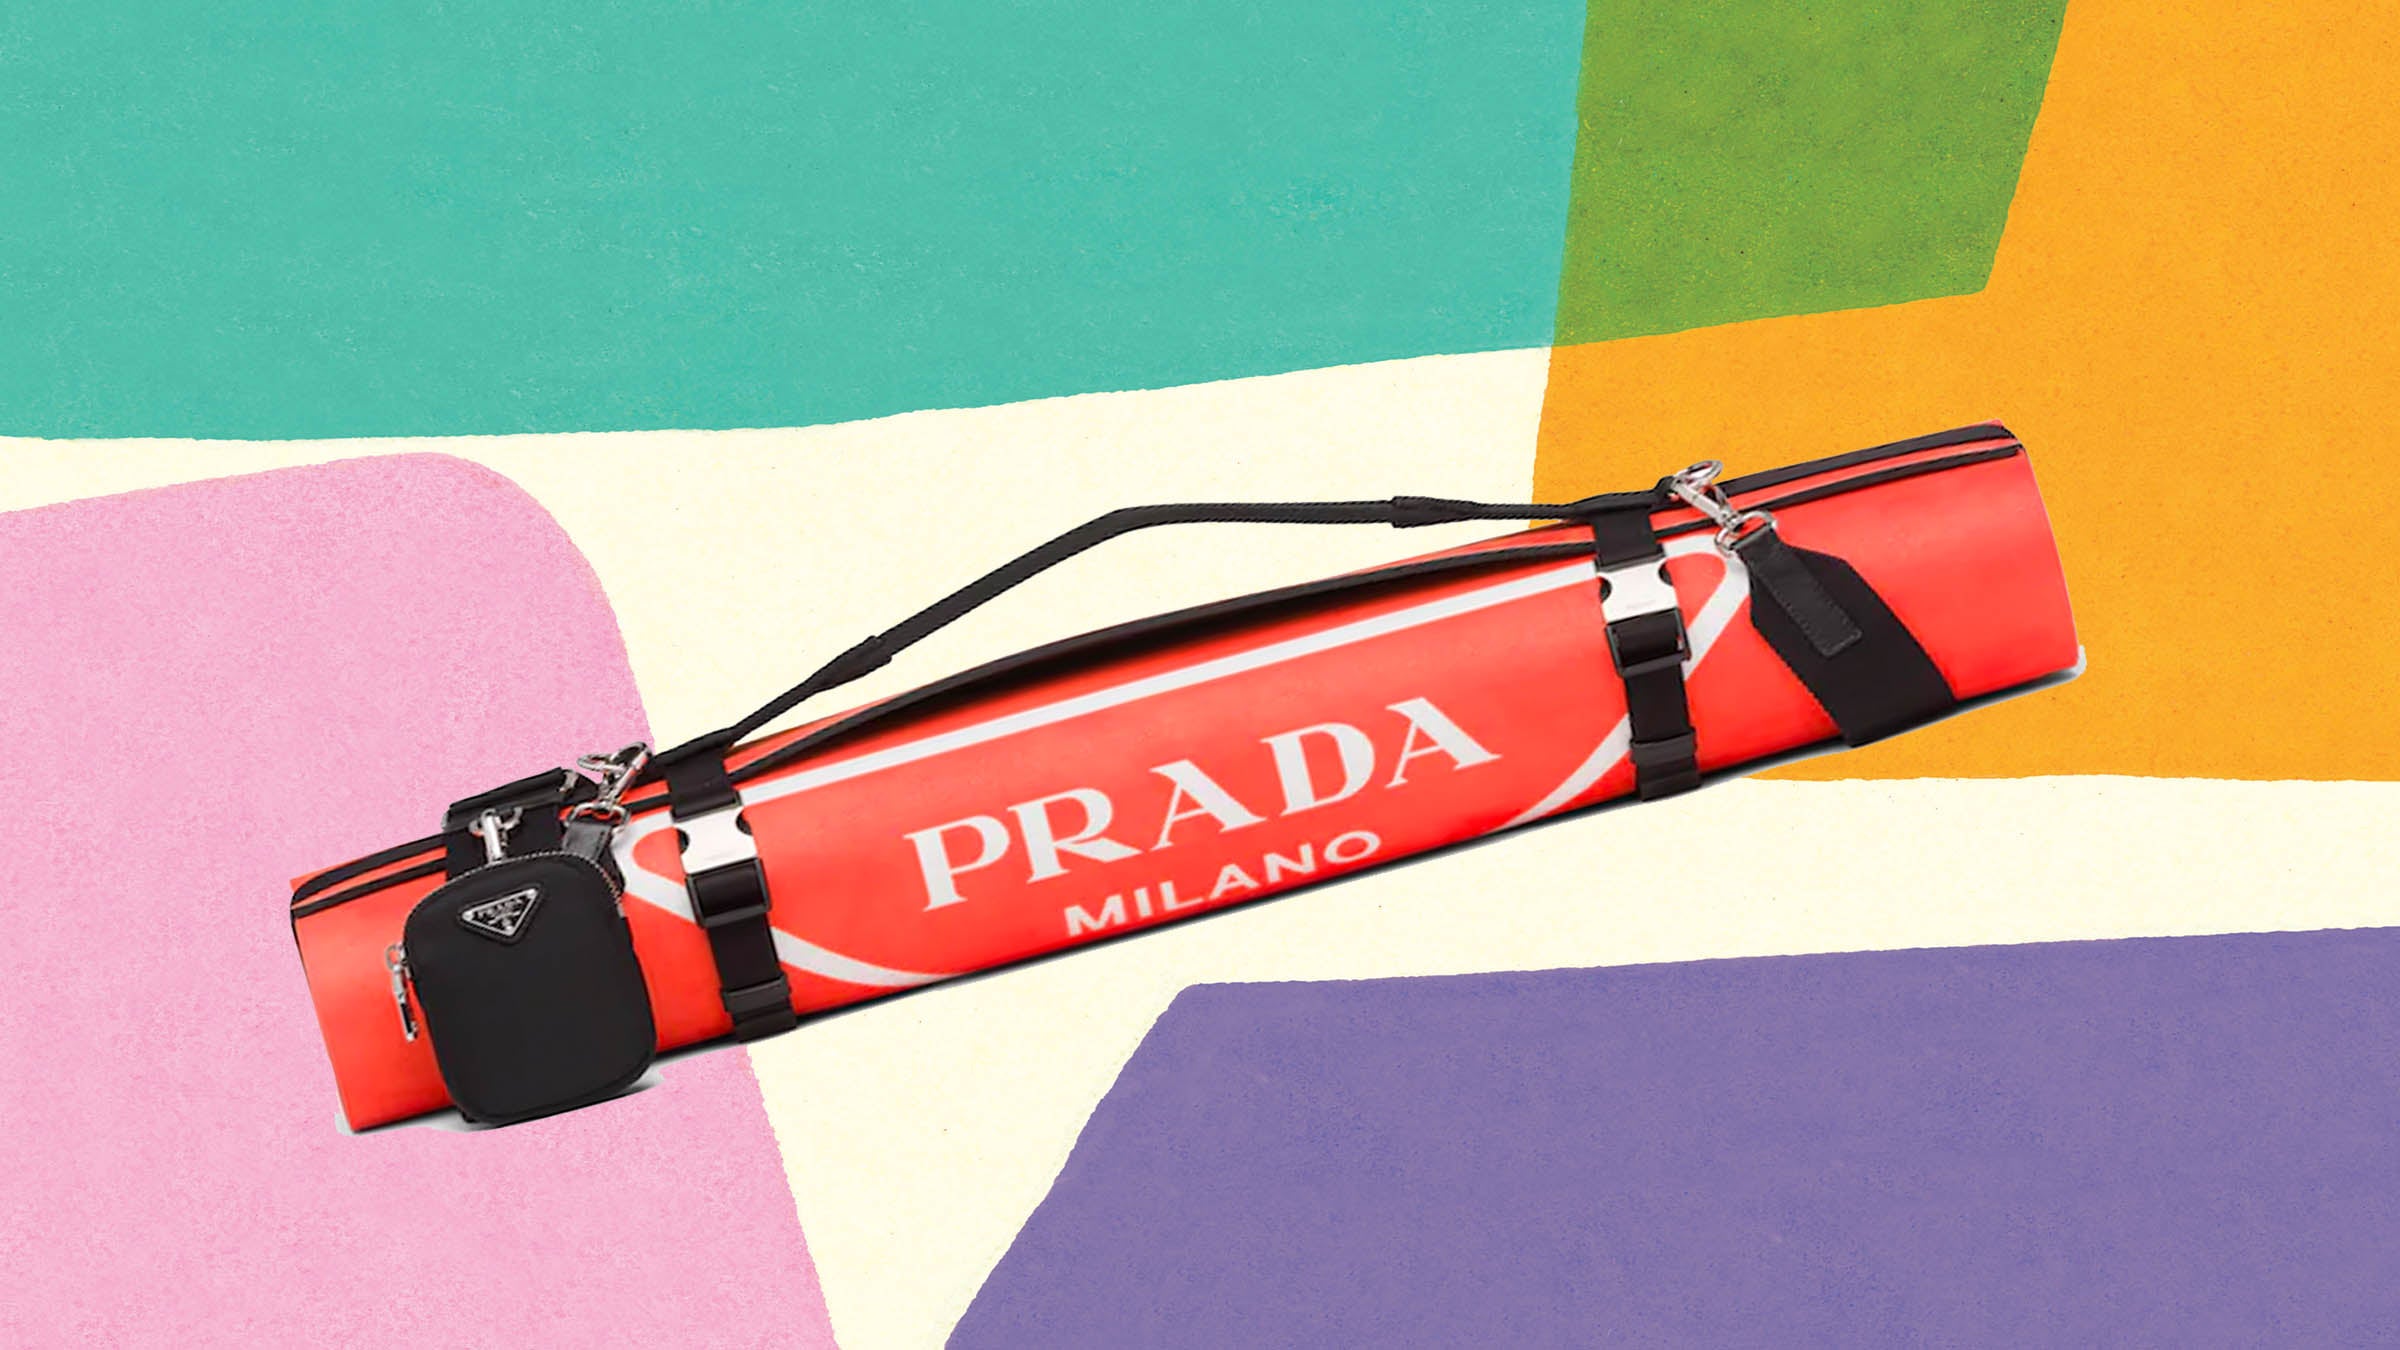 Complete with $1,990 yoga mats and $650 nylon dog harnesses, here's a look  at Prada's all-new outdoor collection - Luxurylaunches